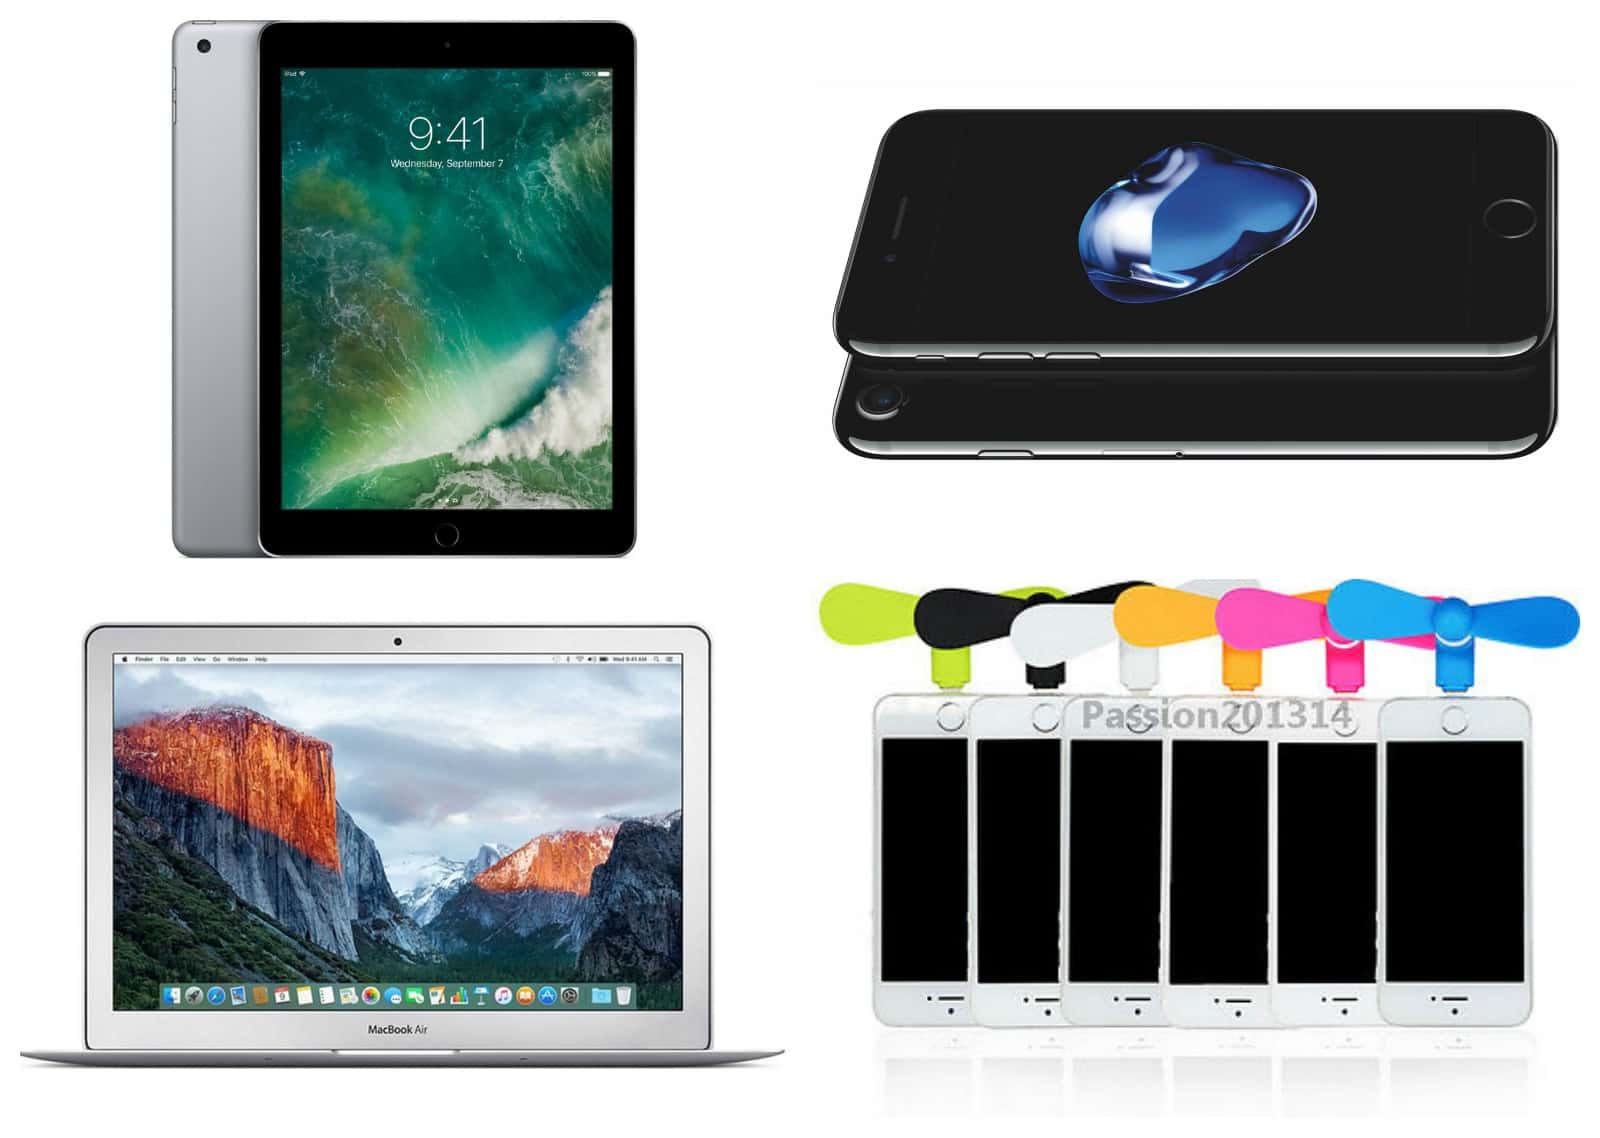 Want to save some bucks on the already-affordable new iPad?